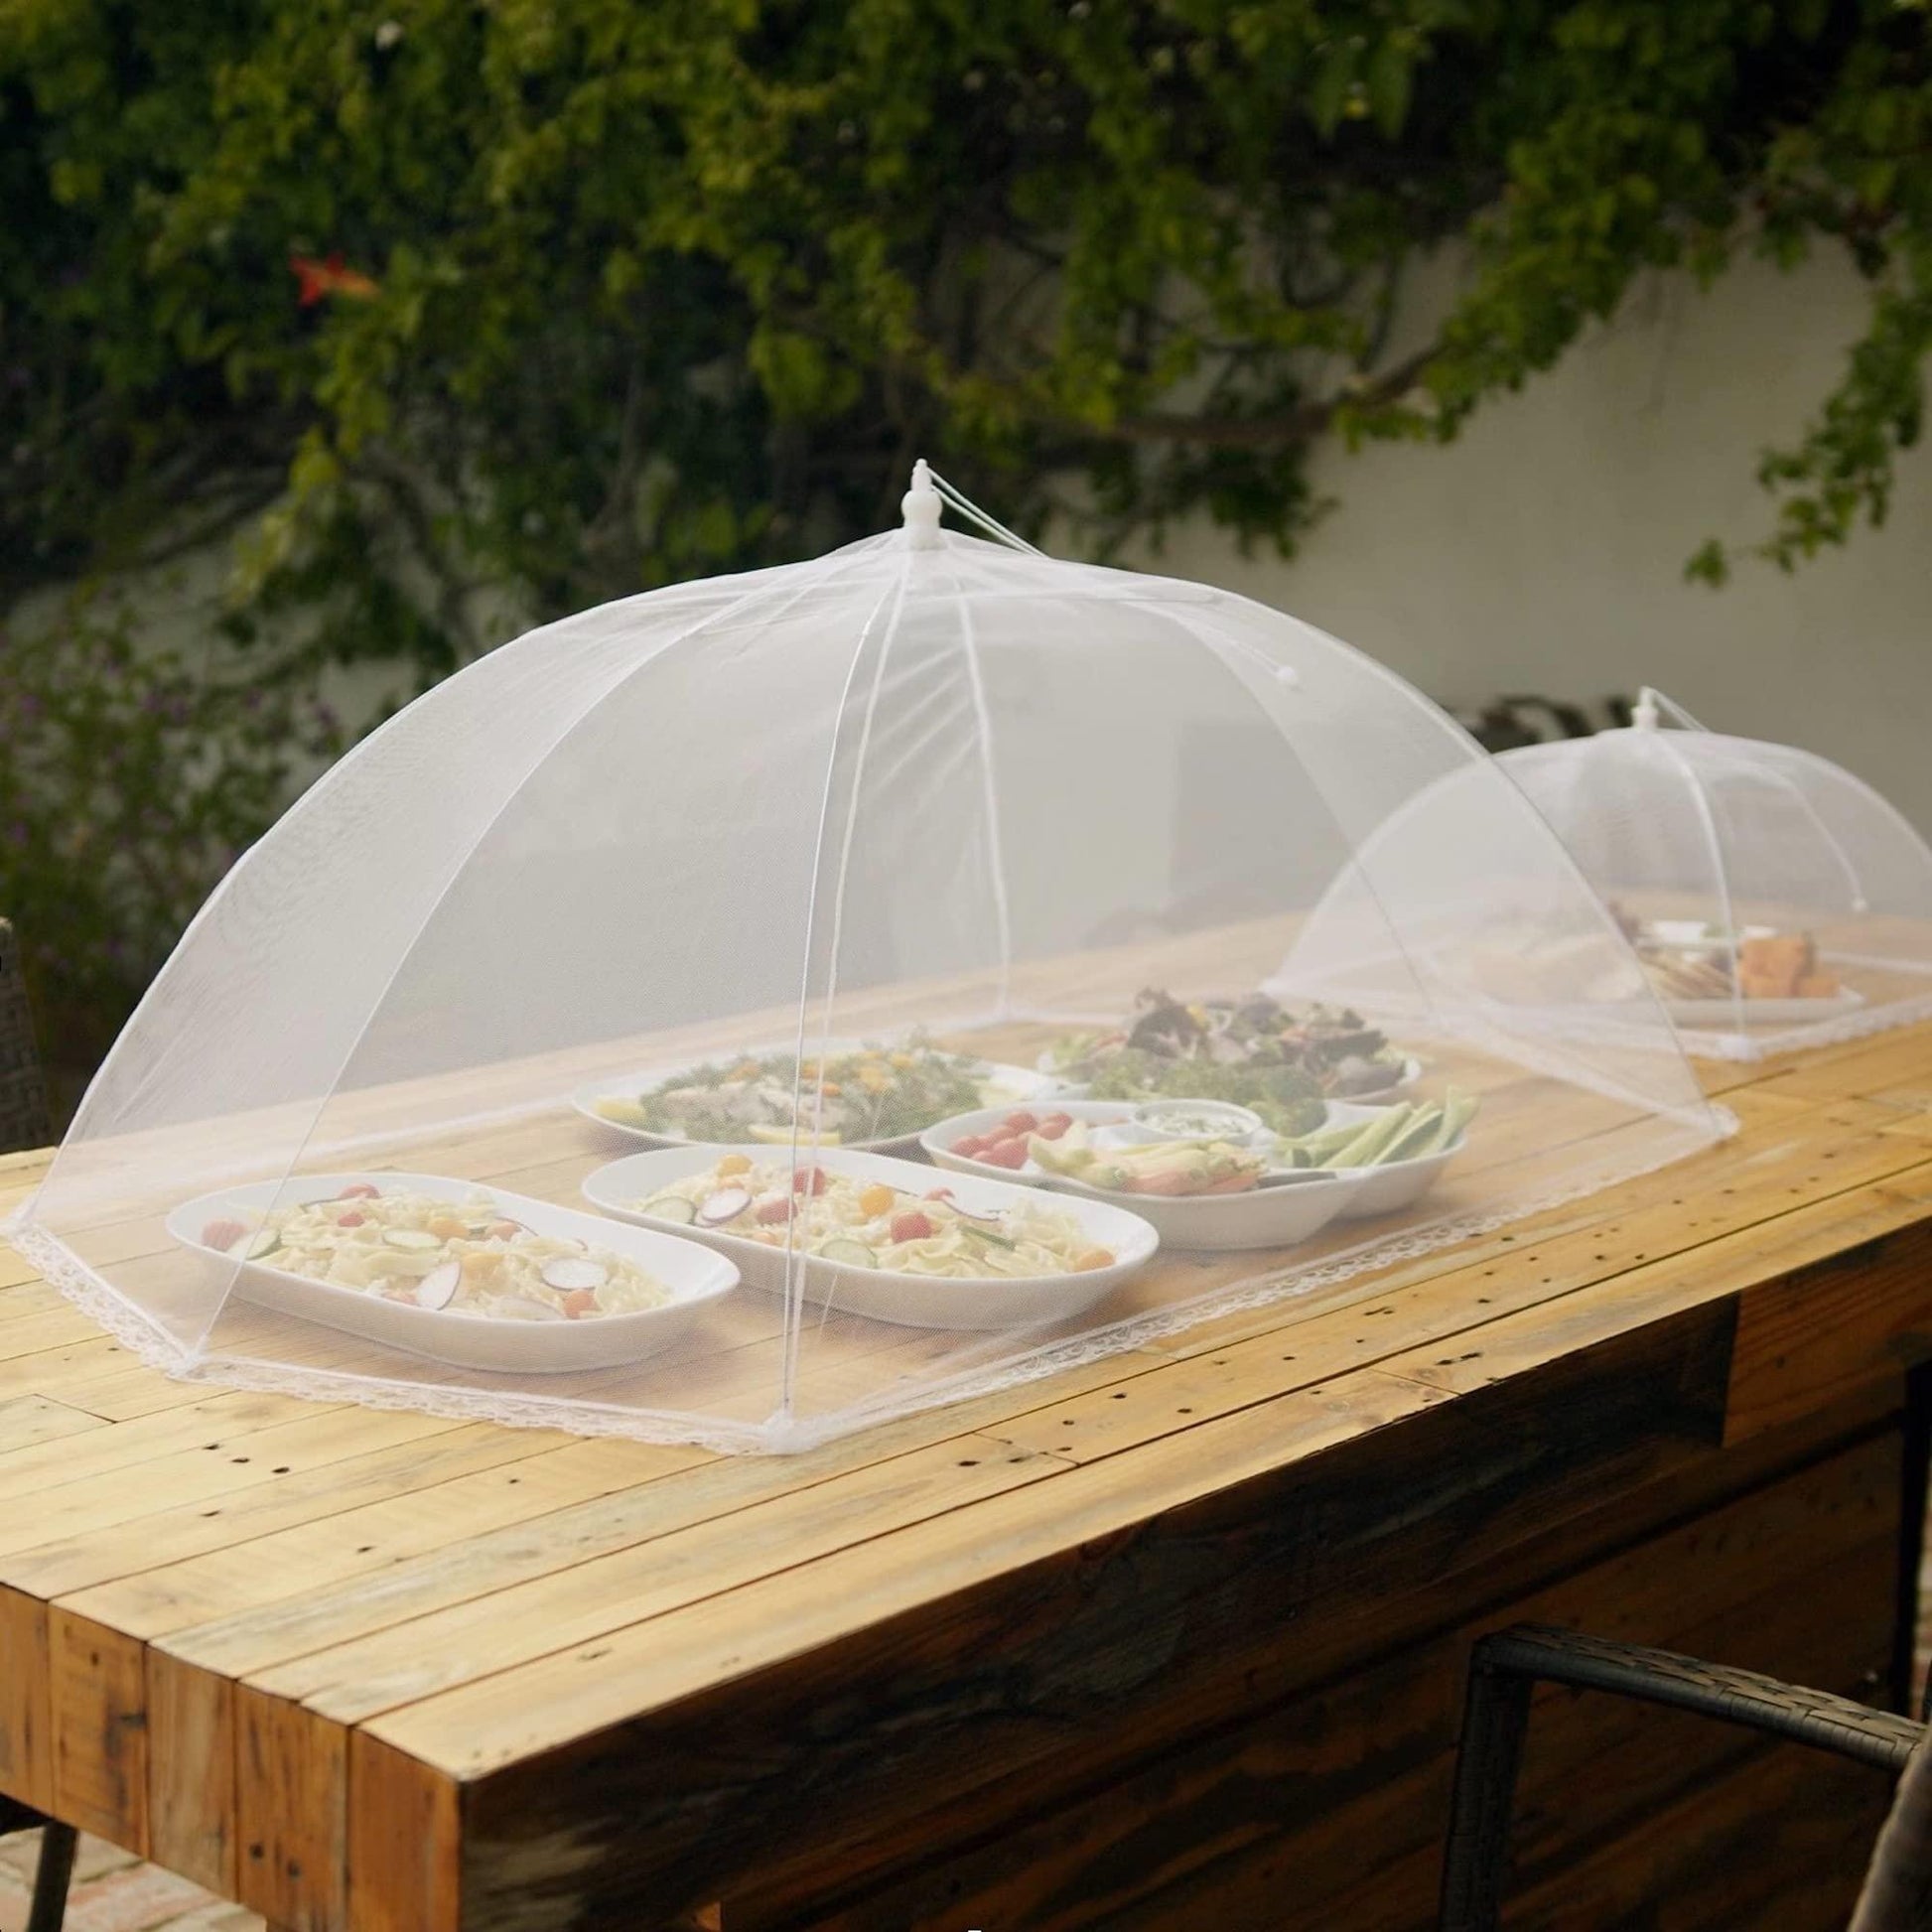 Simply Genius (6 pack) Large and Tall 17x17 Pop-Up Mesh Food Covers Tent Umbrella for Outdoors, Screen Tents, Parties Picnics, BBQs, Reusable and Collapsible Food Tents - CookCave